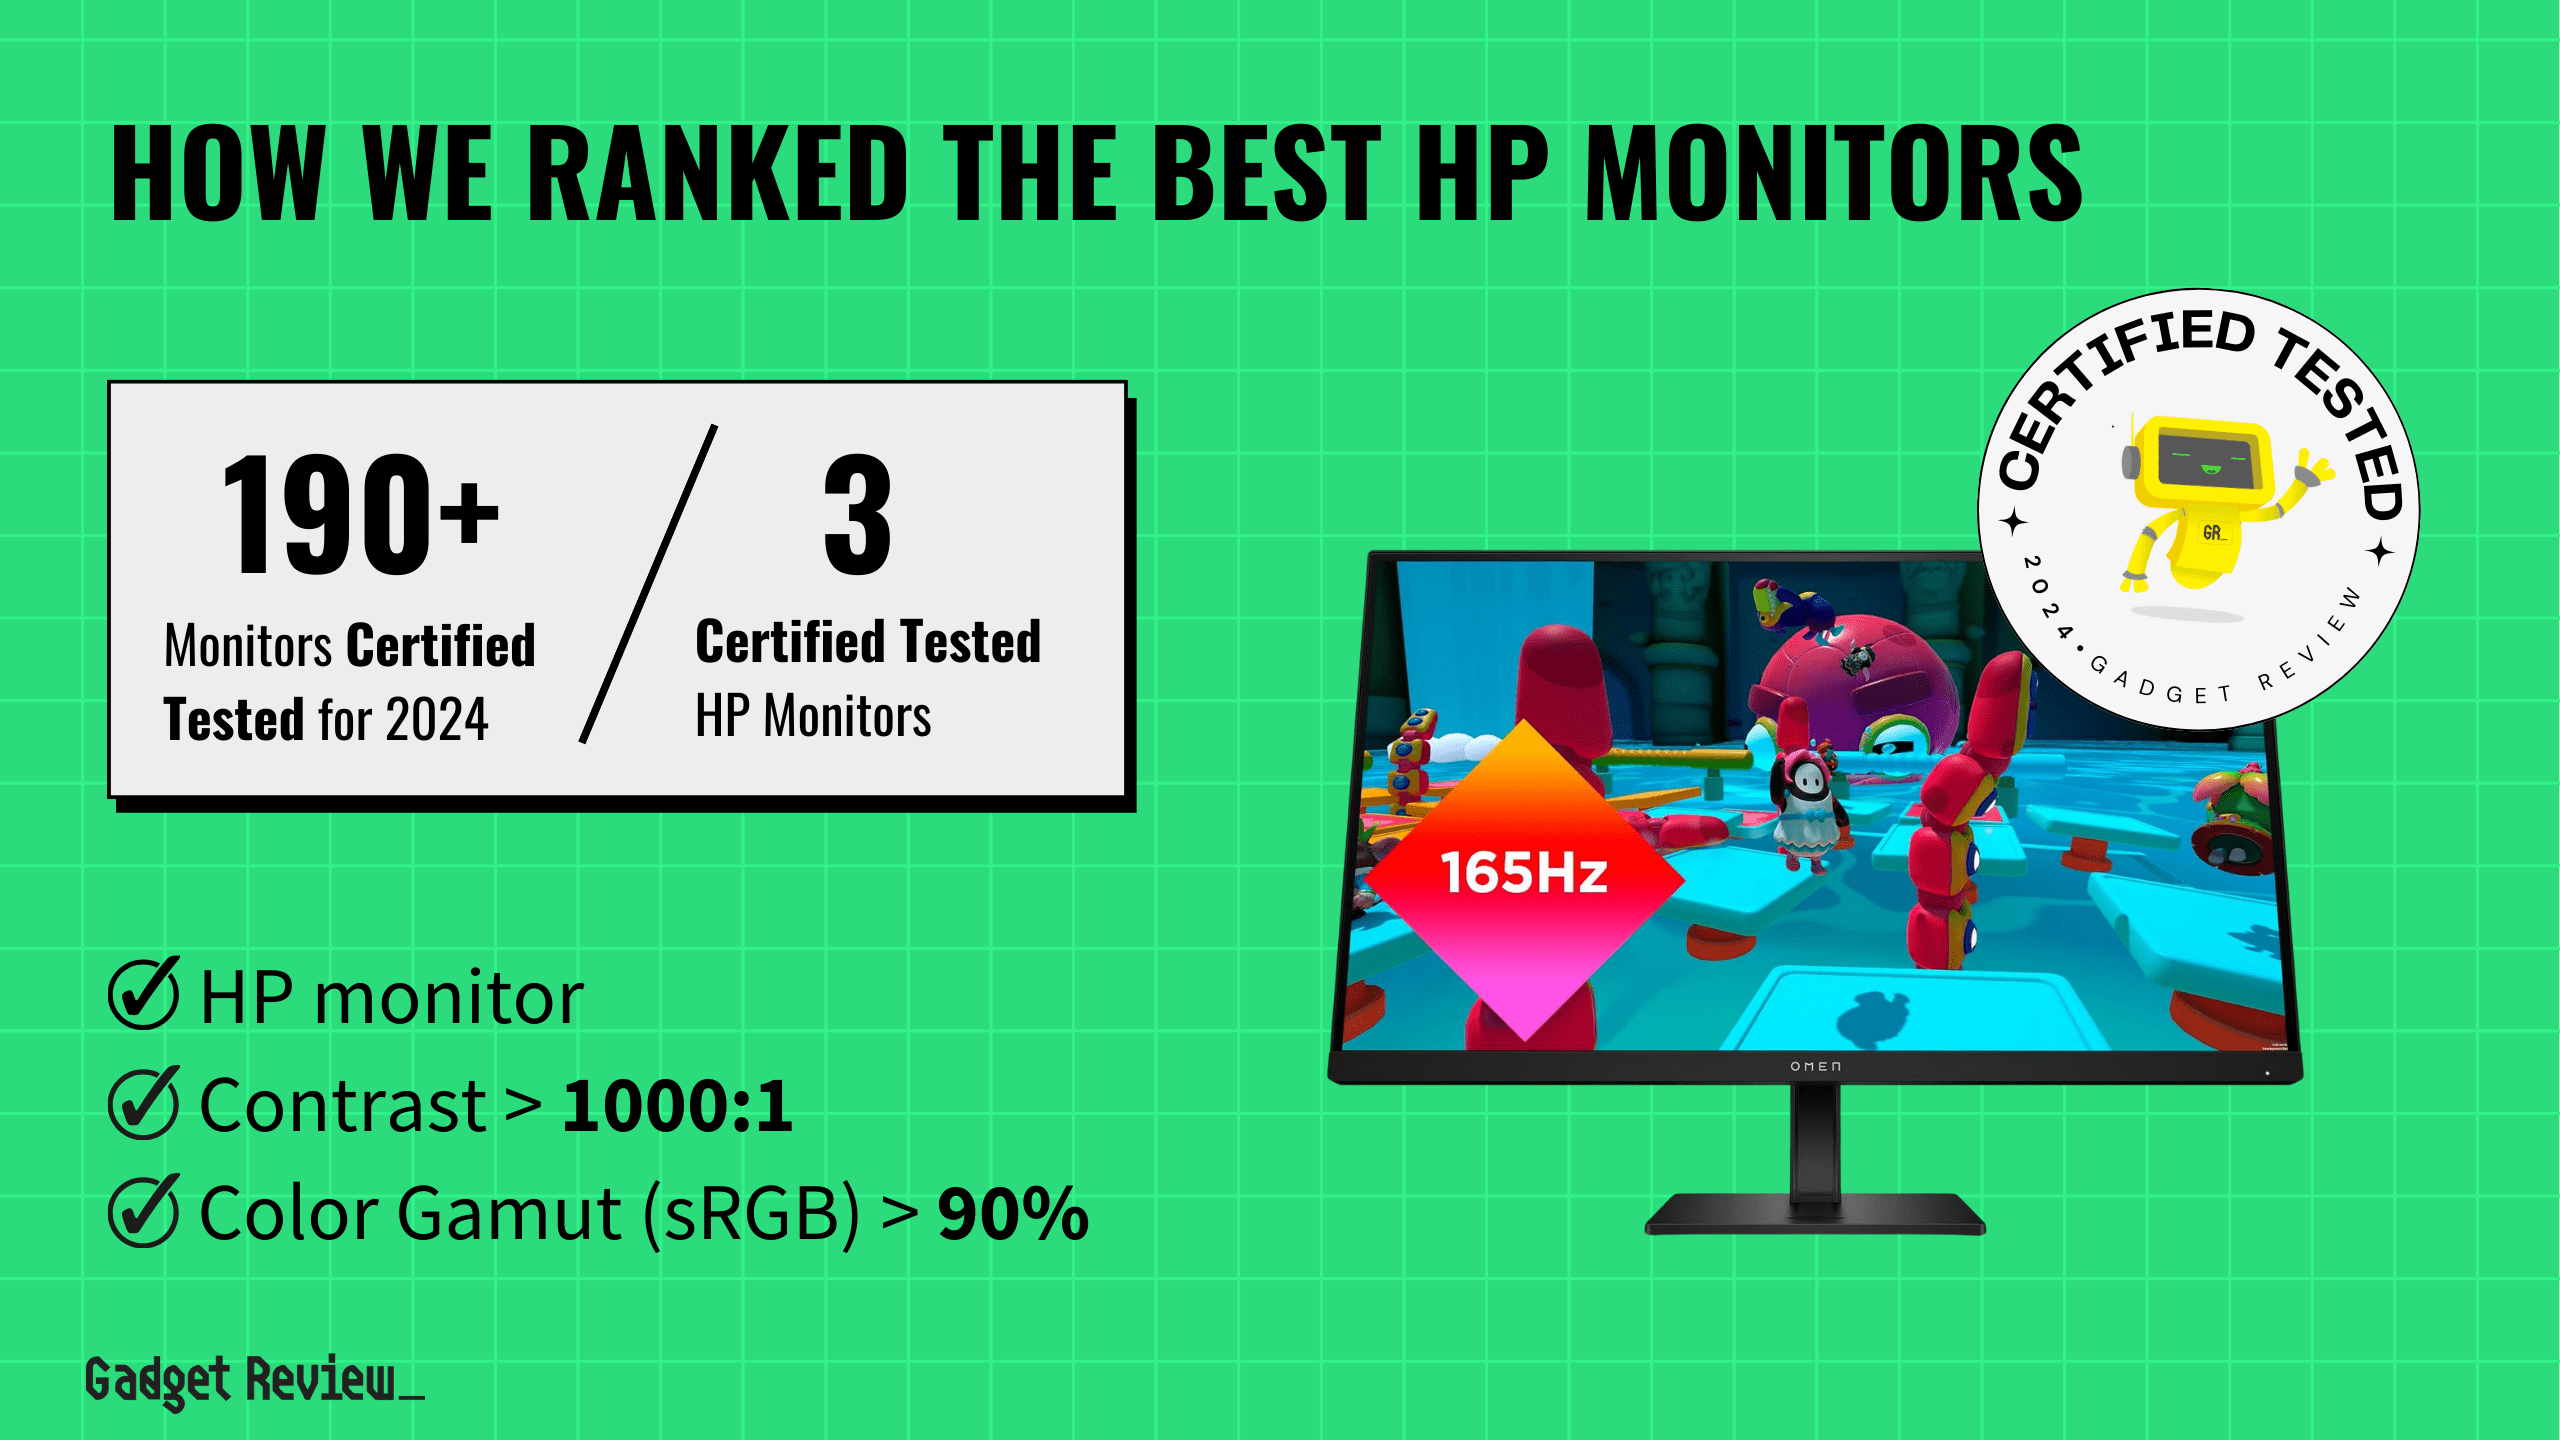 What’s the Best HP Monitor? 3 Options Ranked